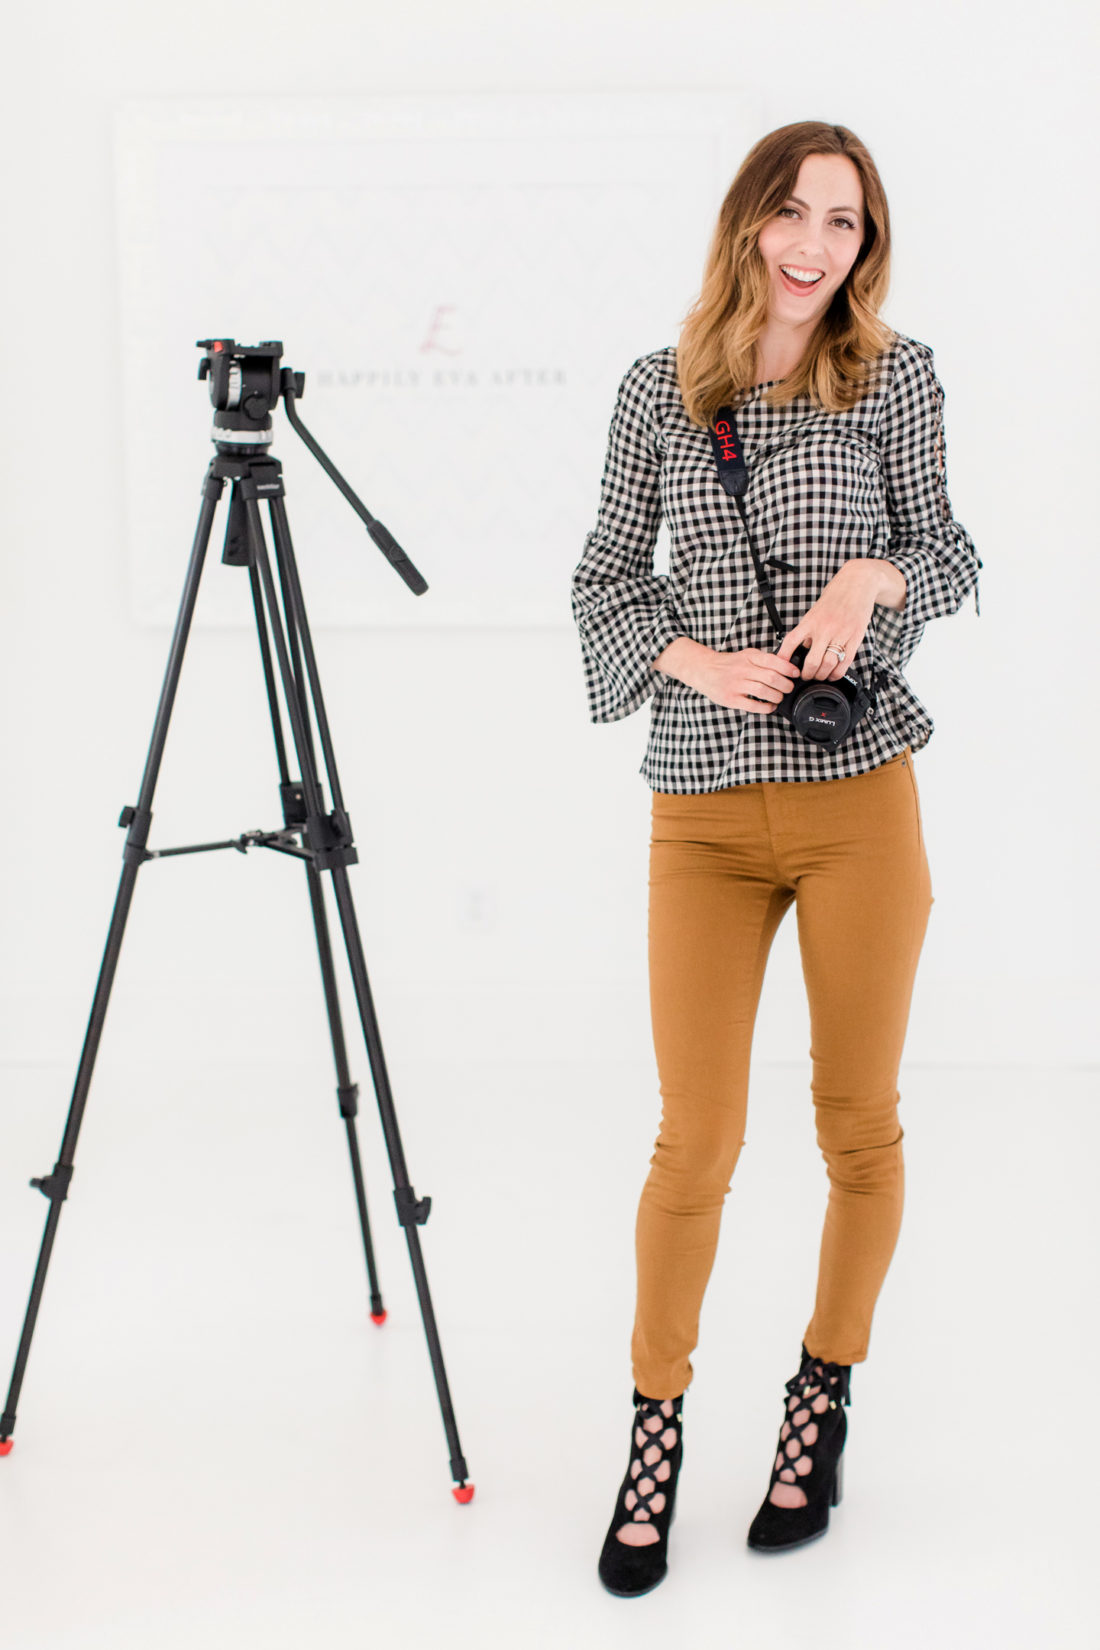 Eva Amurri Martino stands with her camera tripod in the Happily Eva After studio in Connecticut